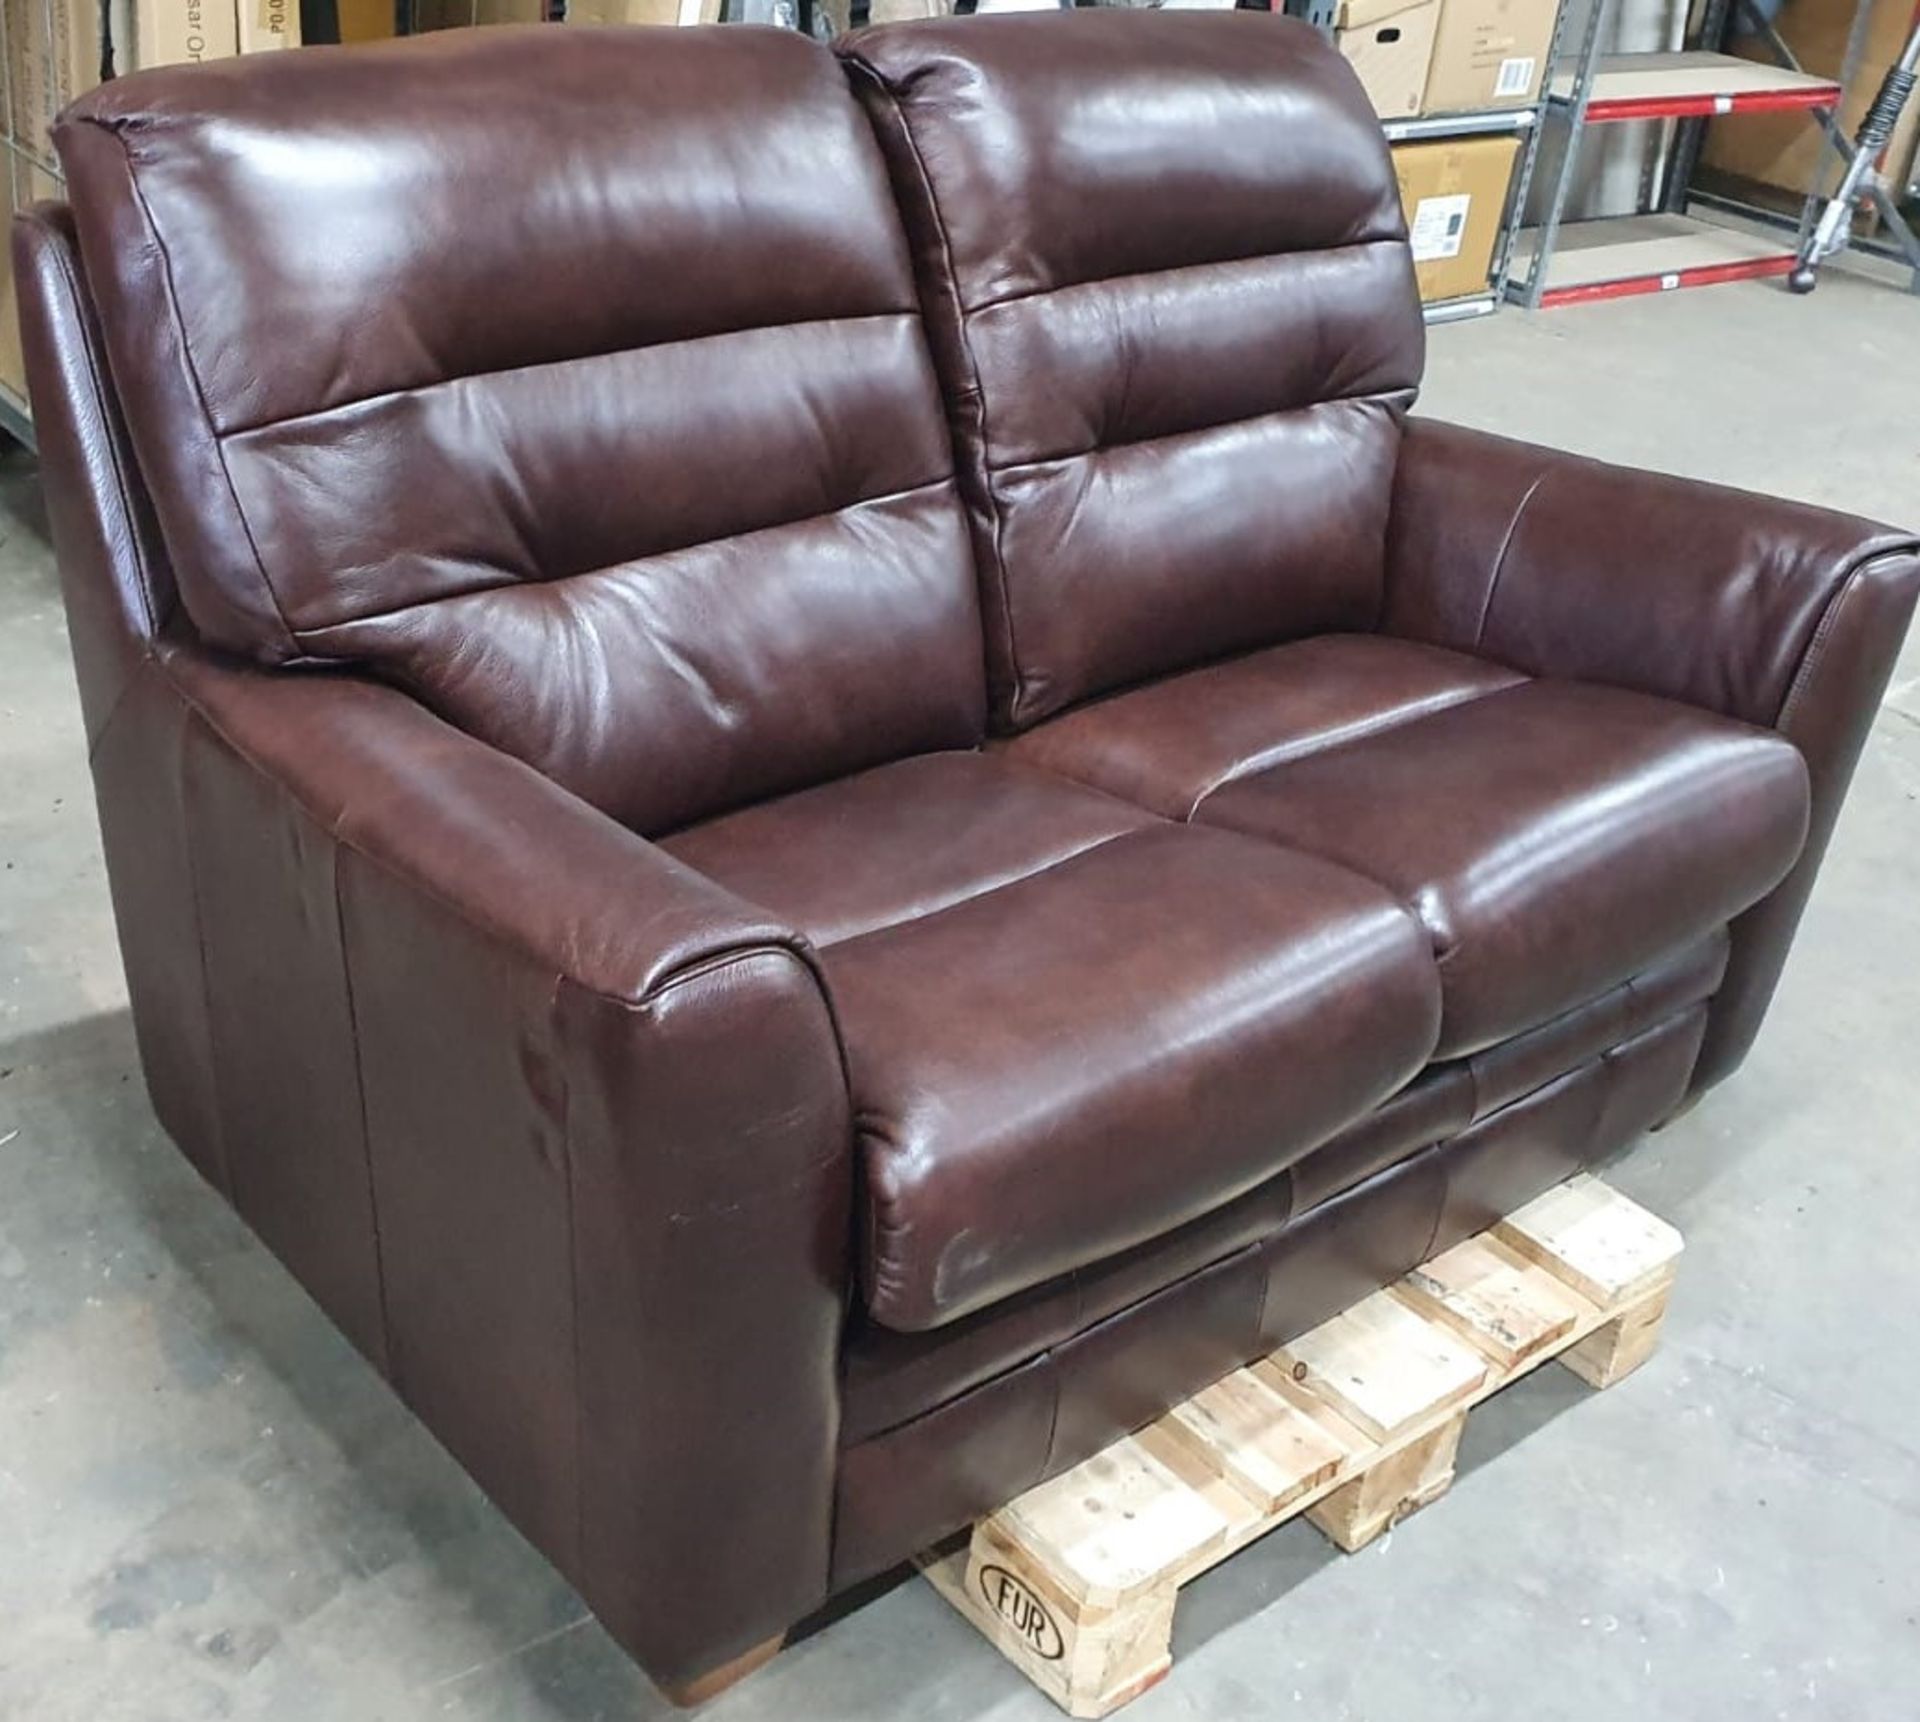 Ex Display 2 Seater Leather Sofa - Image 2 of 5